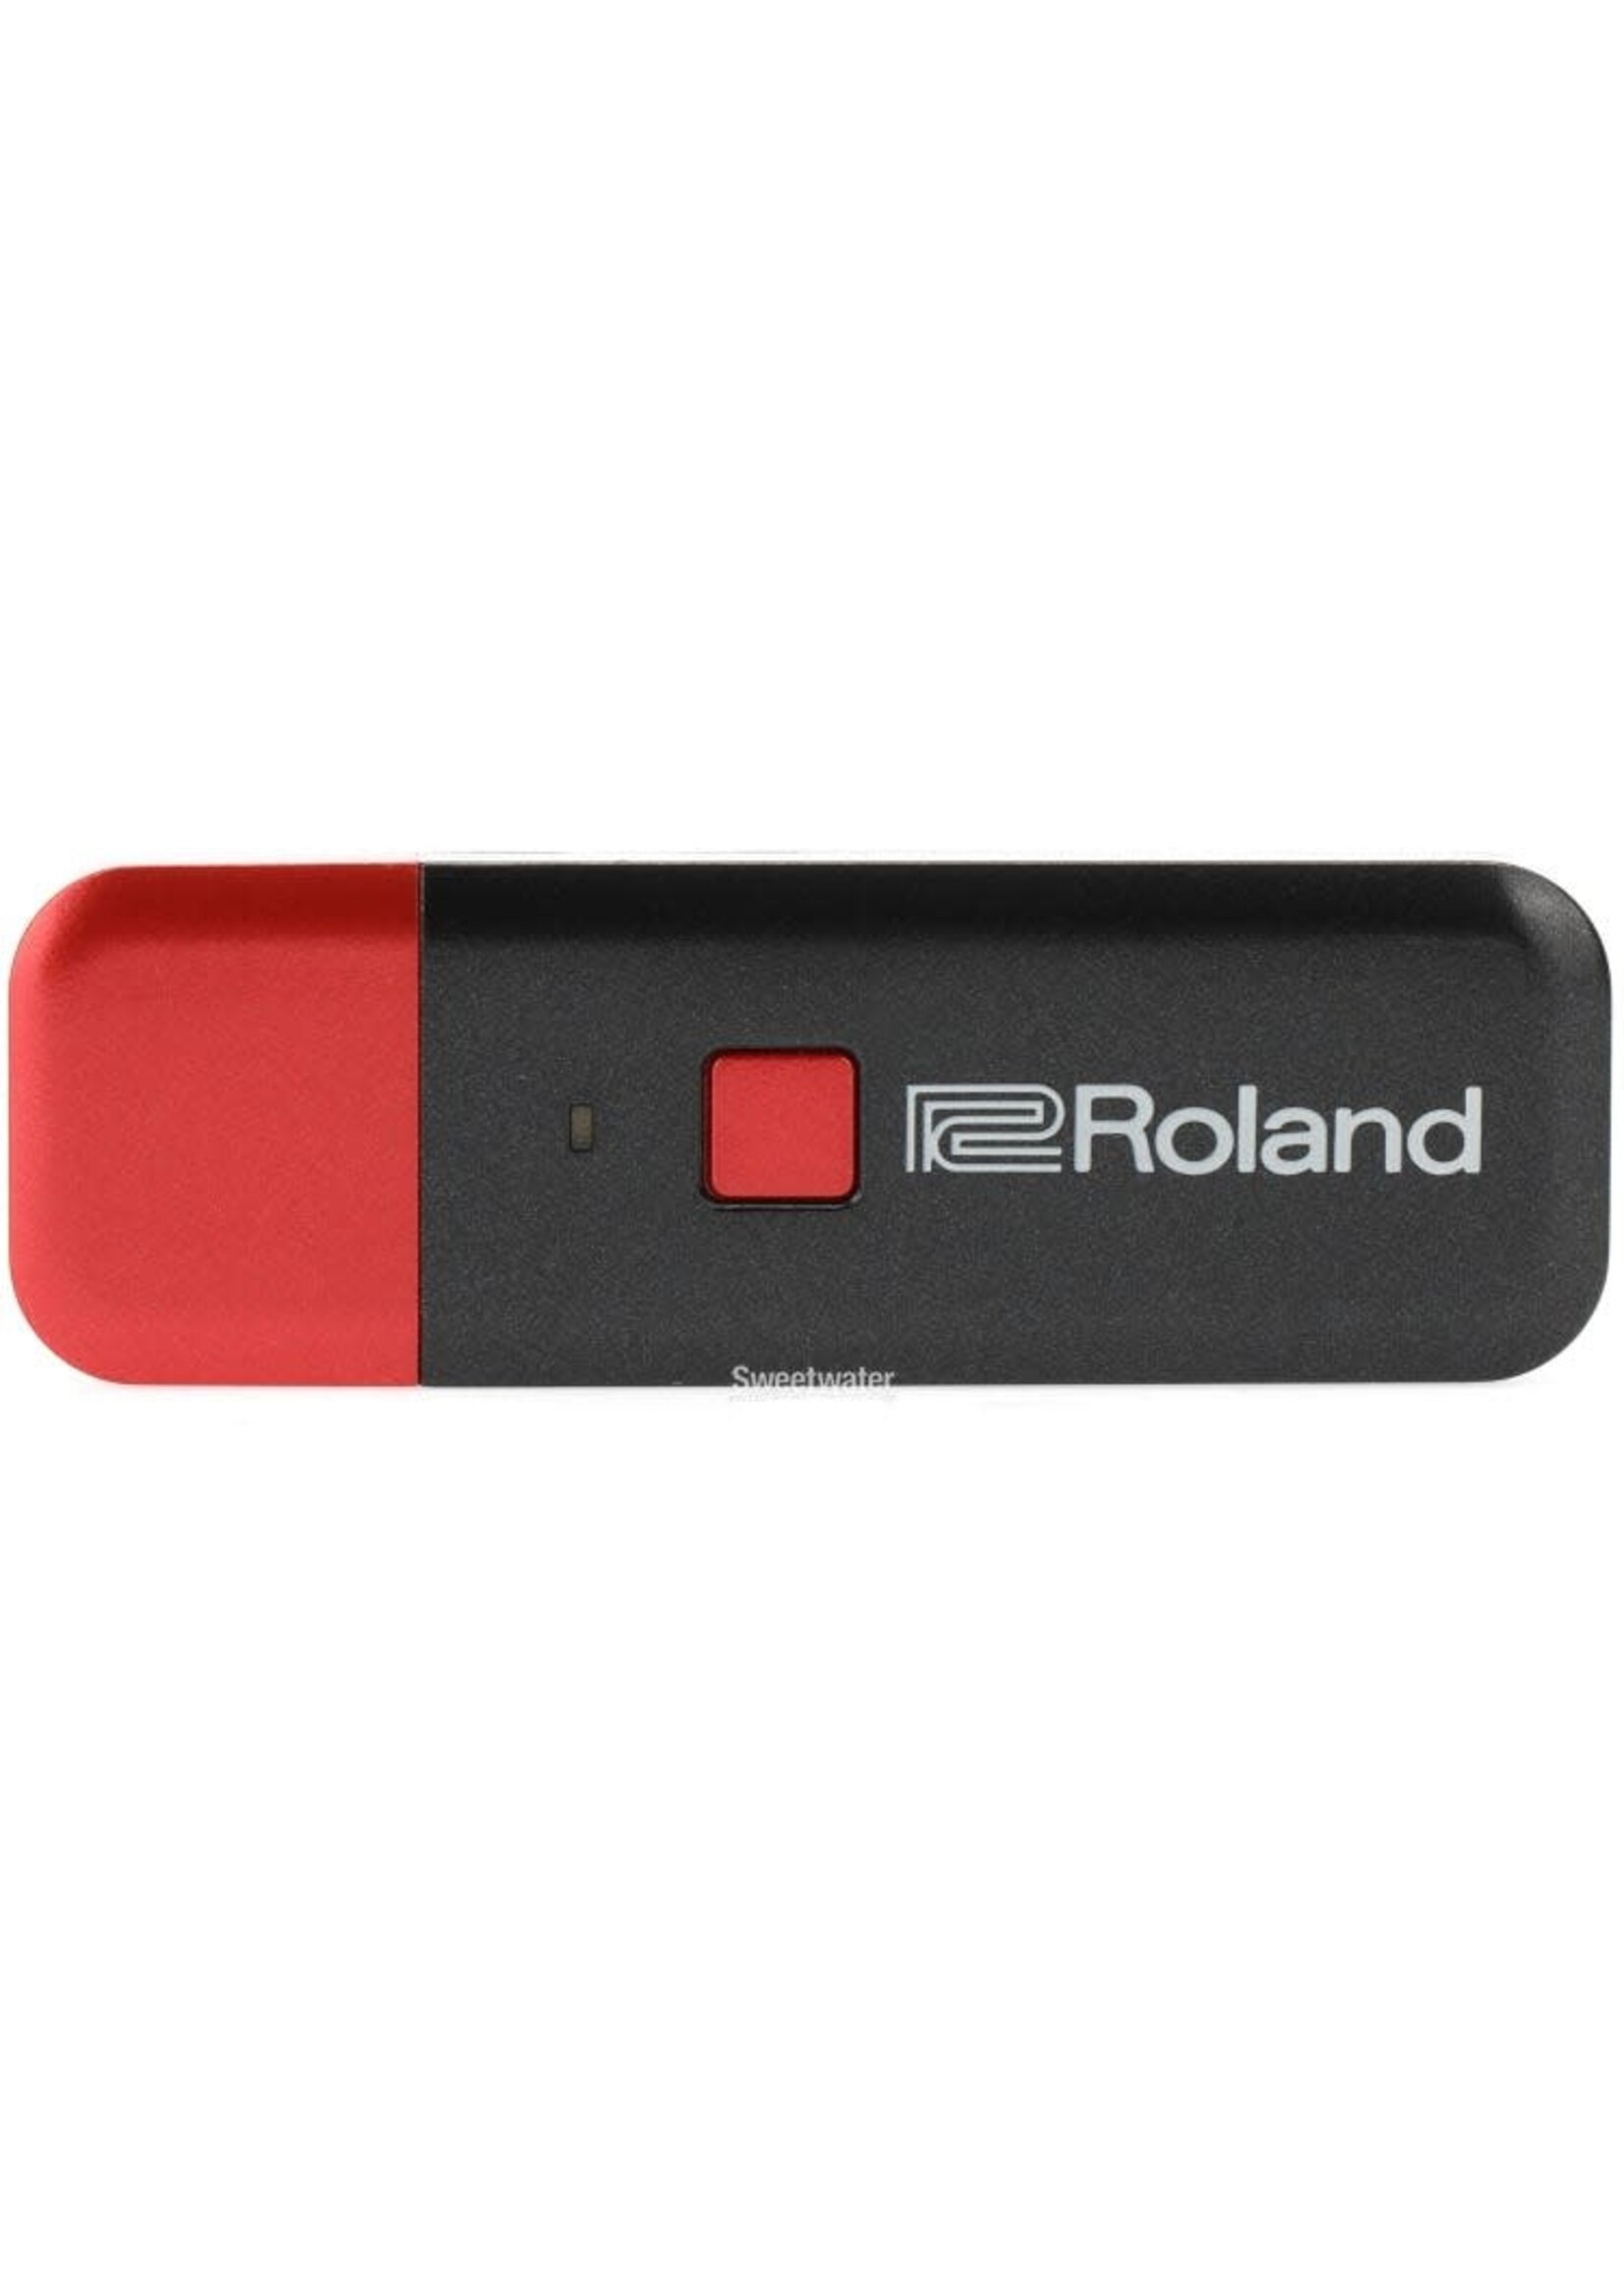 Roland Roland WC-1 Wireless Adapter with Roland Cloud Bundle